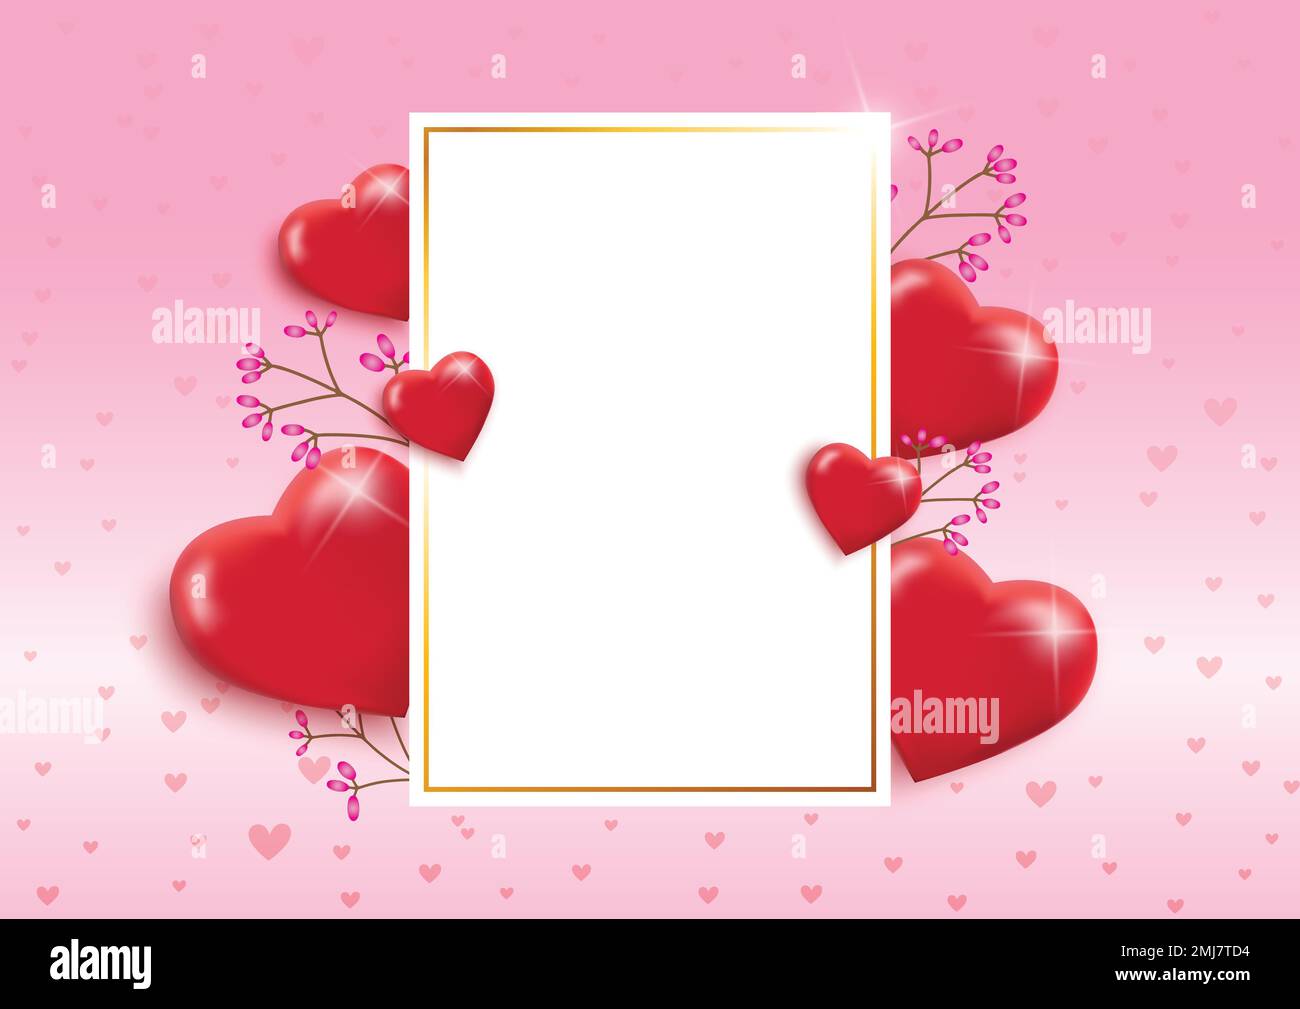 Valentines Day background with textbox and beautiful hearts balloons. Greeting card, invitation or banner template Stock Vector